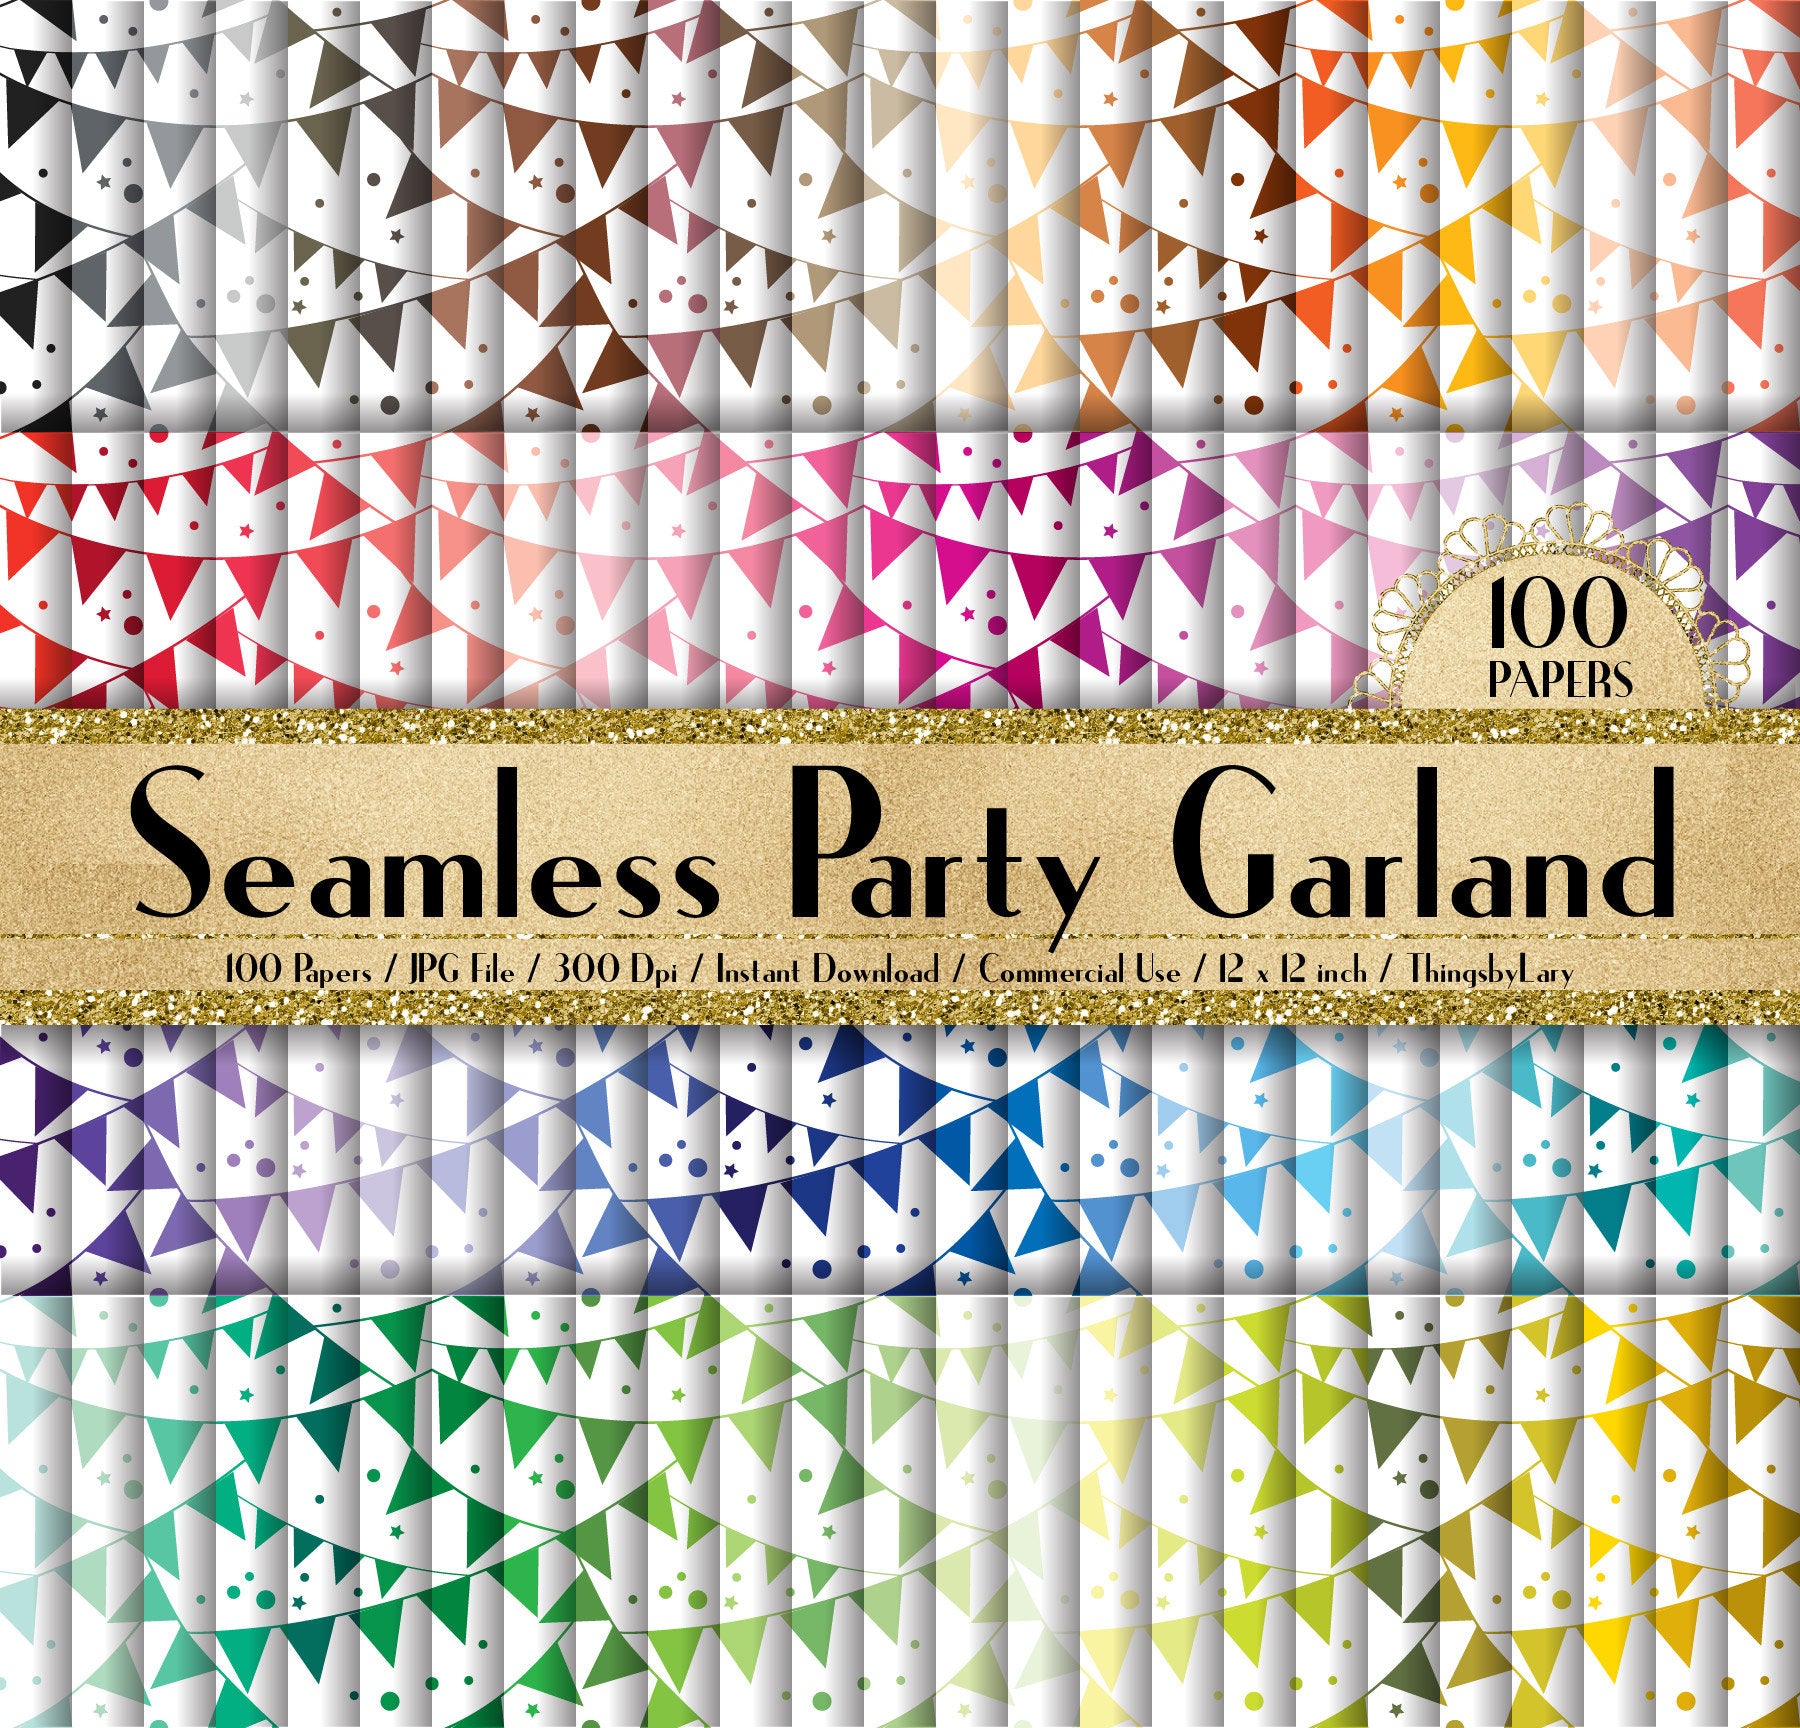 100 Seamless Party Garland Papers 12 inch 300 Dpi Instant Download Commercial Use, Planner Paper, Scrapbooking Birthday Party Kit, Seamless